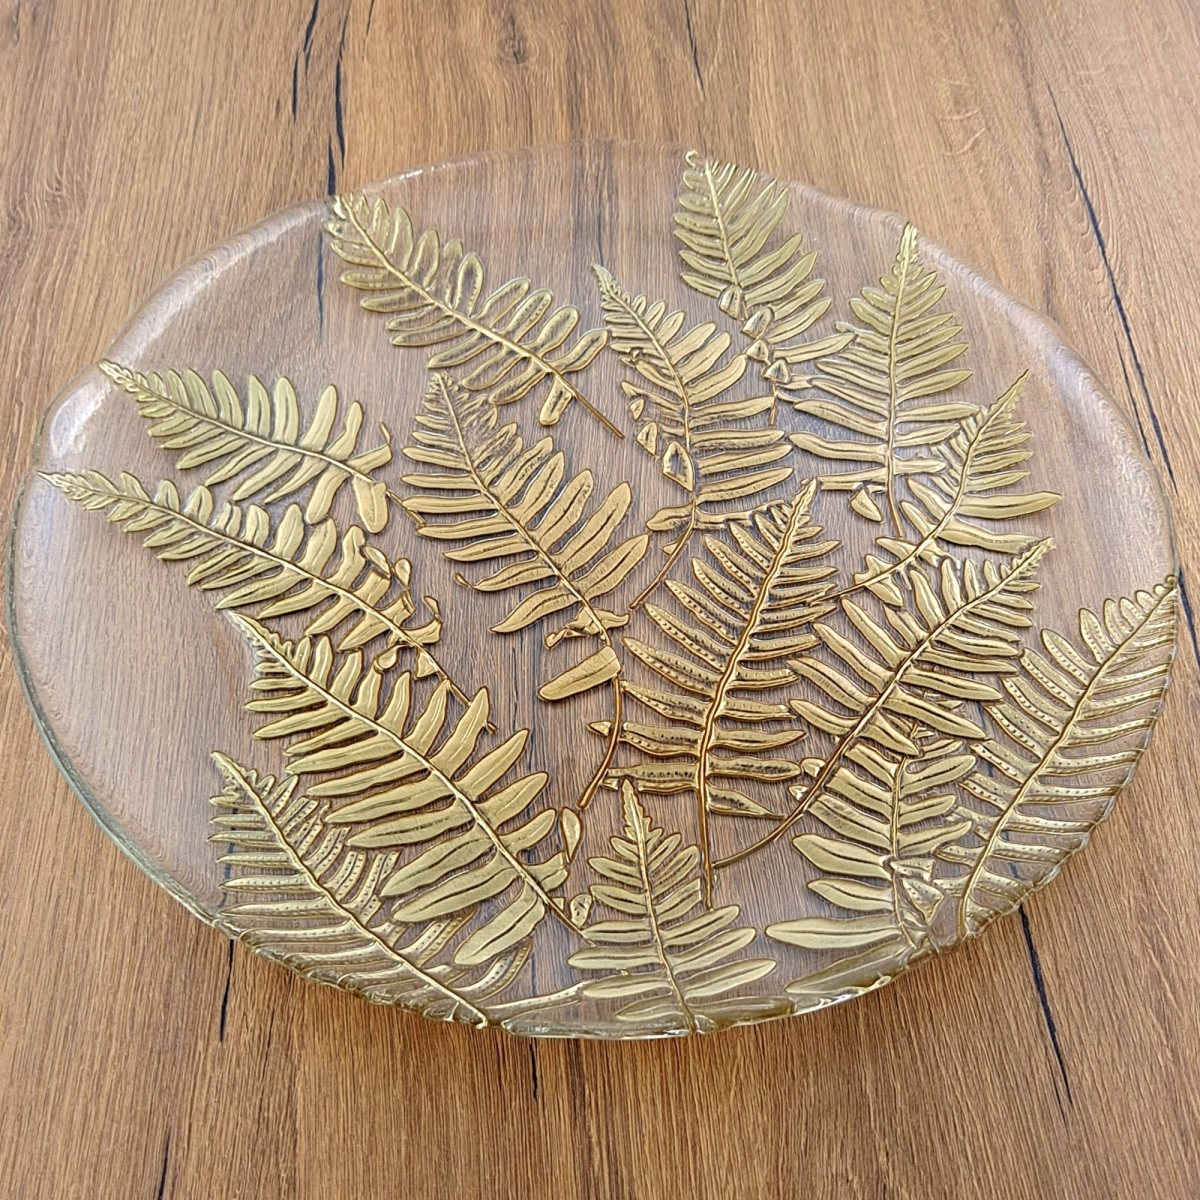 7553-1 13 in. Fern Charger Plate, Gold -  RED POMEGRANATE COLLECTION